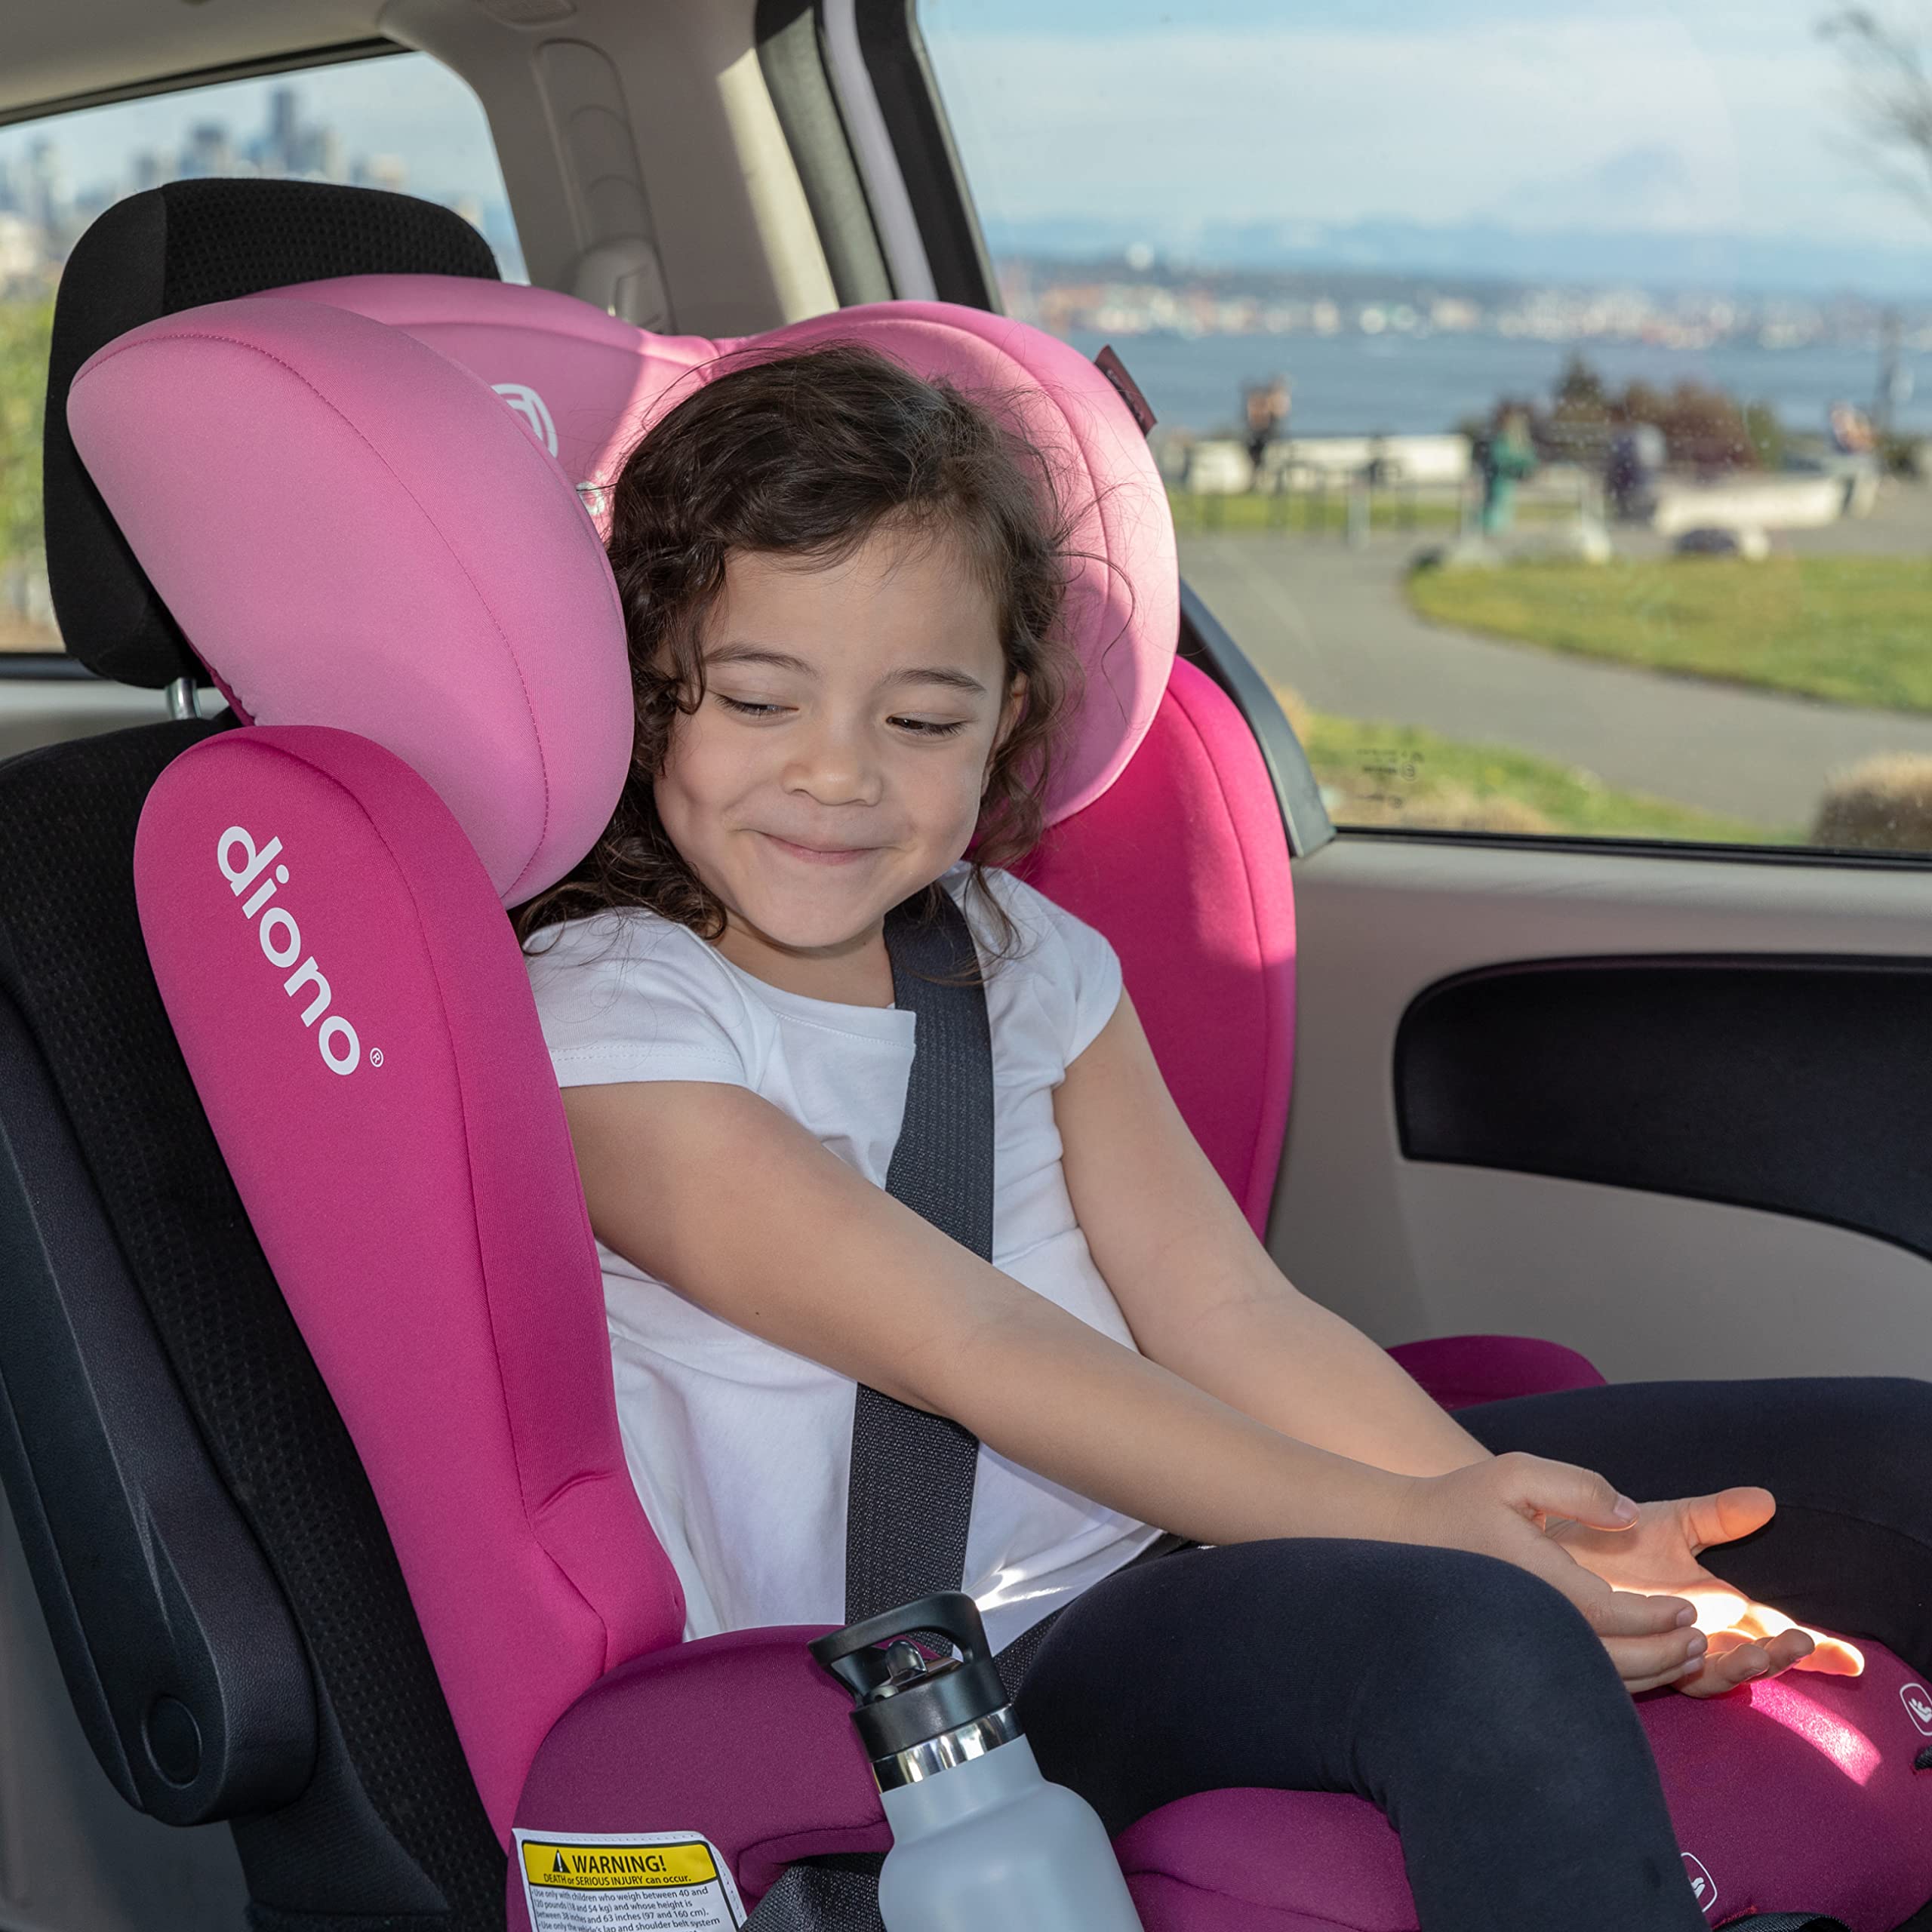 Diono Cambria 2 XL 2022, Dual Latch Connectors, 2-in-1 Belt Positioning Booster Seat, High-Back to Backless Booster with Space and Room to Grow, 8 Years 1 Booster Seat, Black